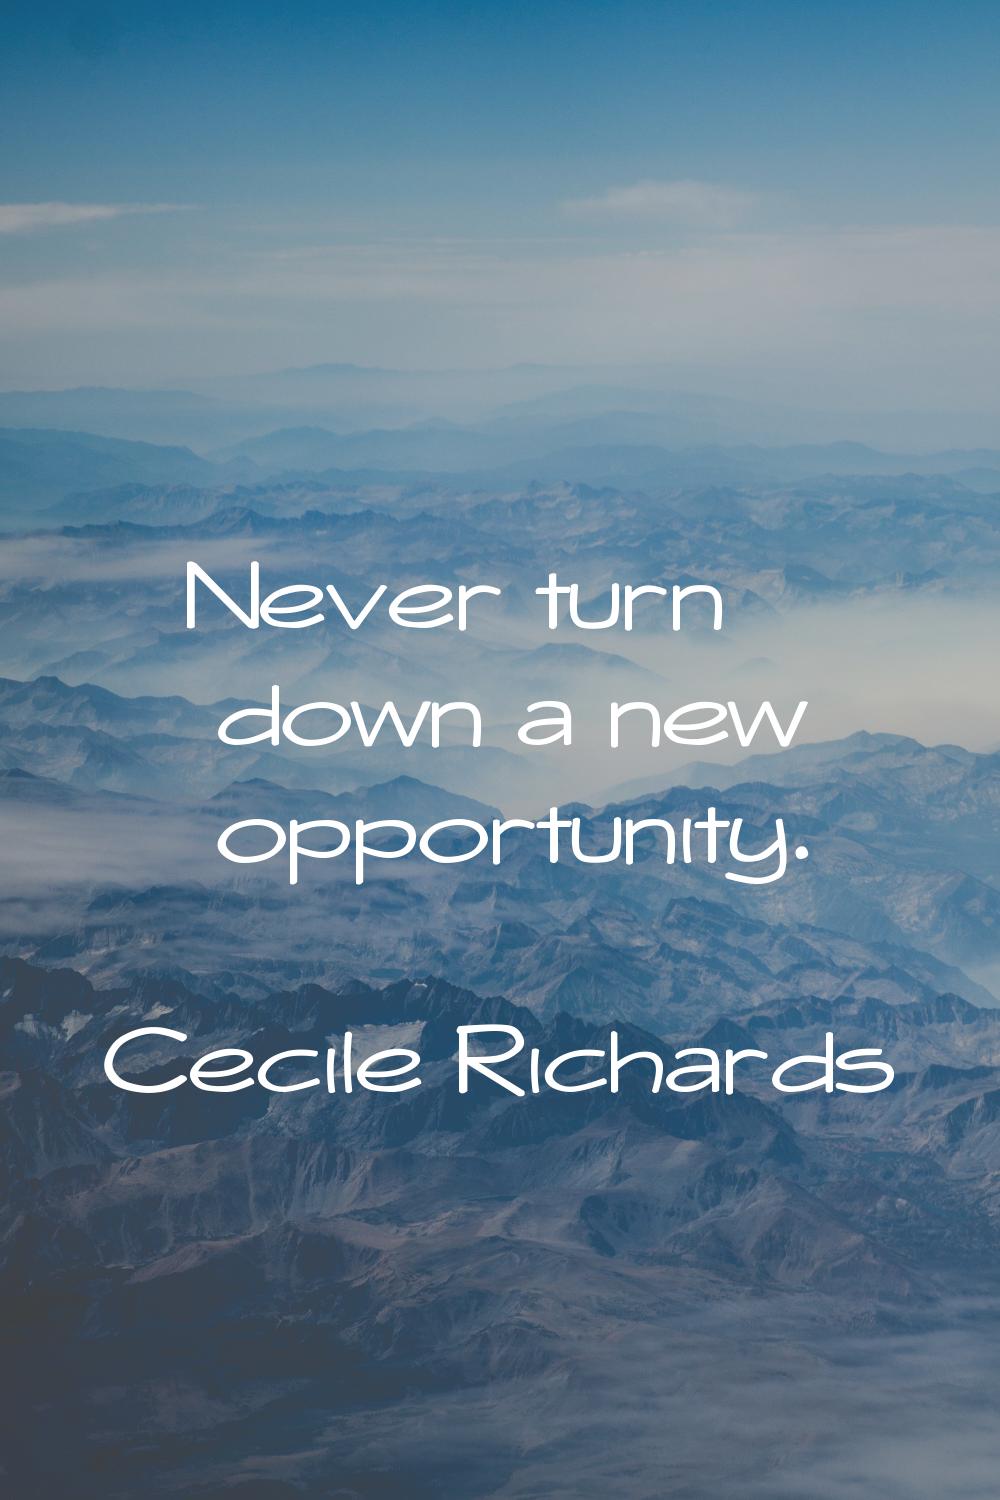 Never turn down a new opportunity.